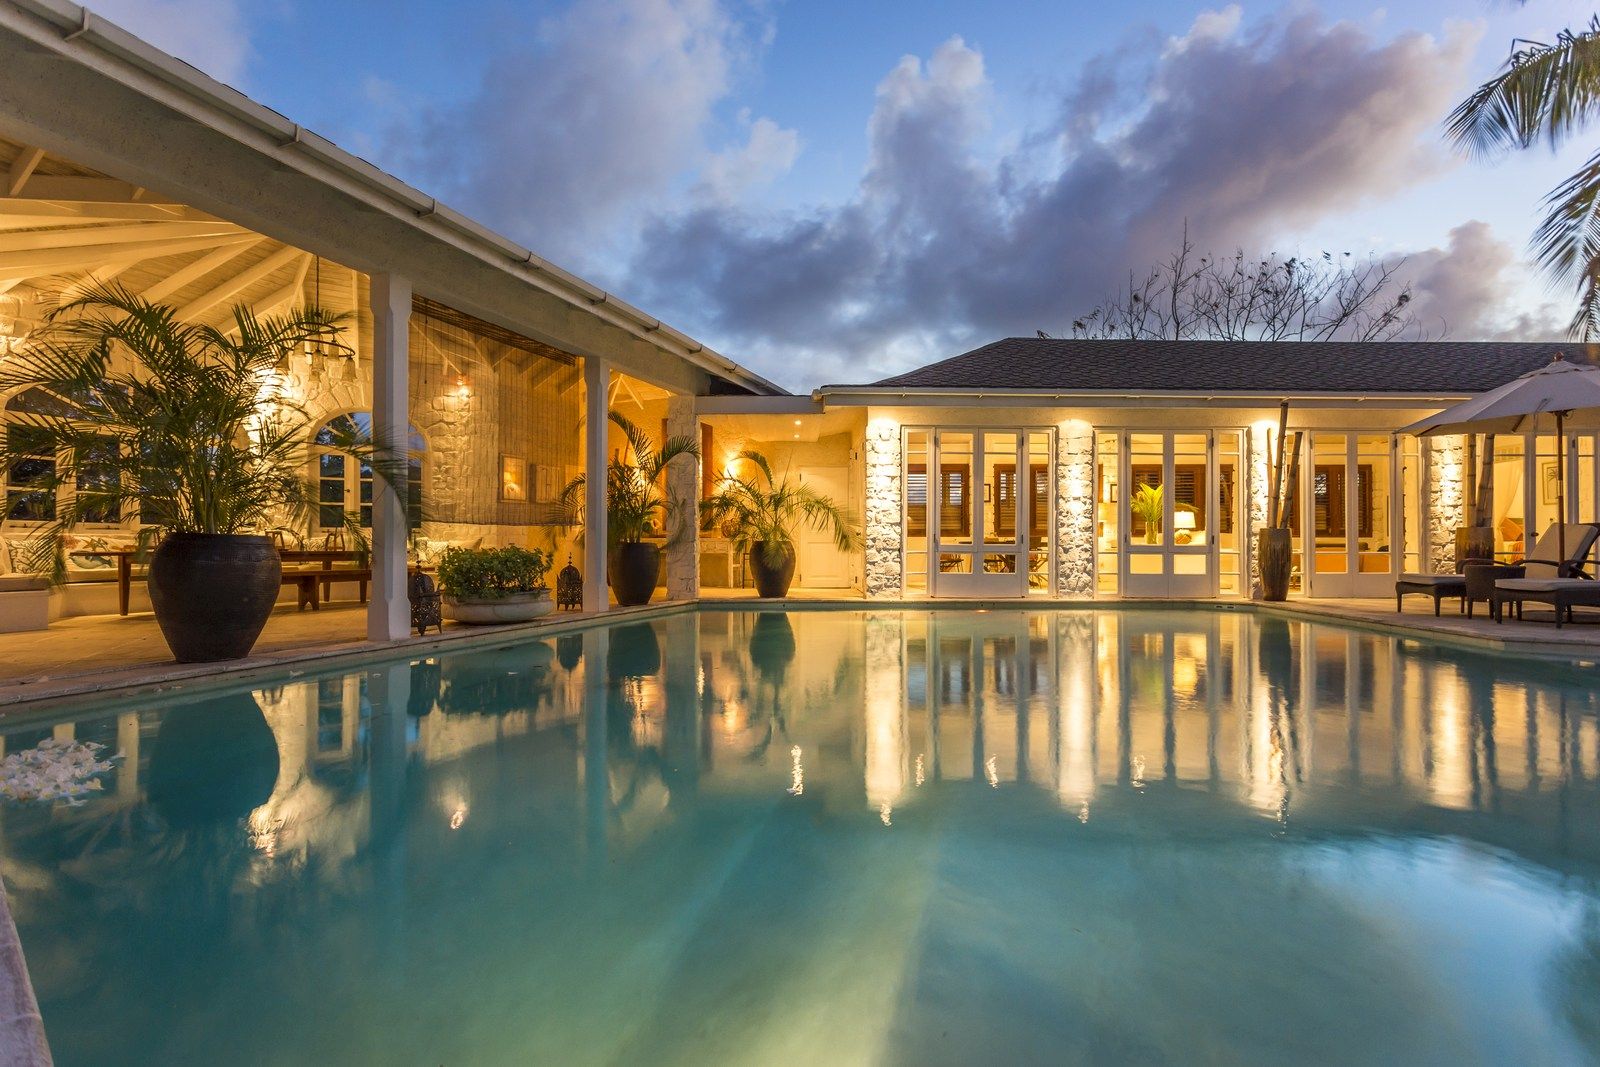 Pool at night at The Cotton House, Mustique